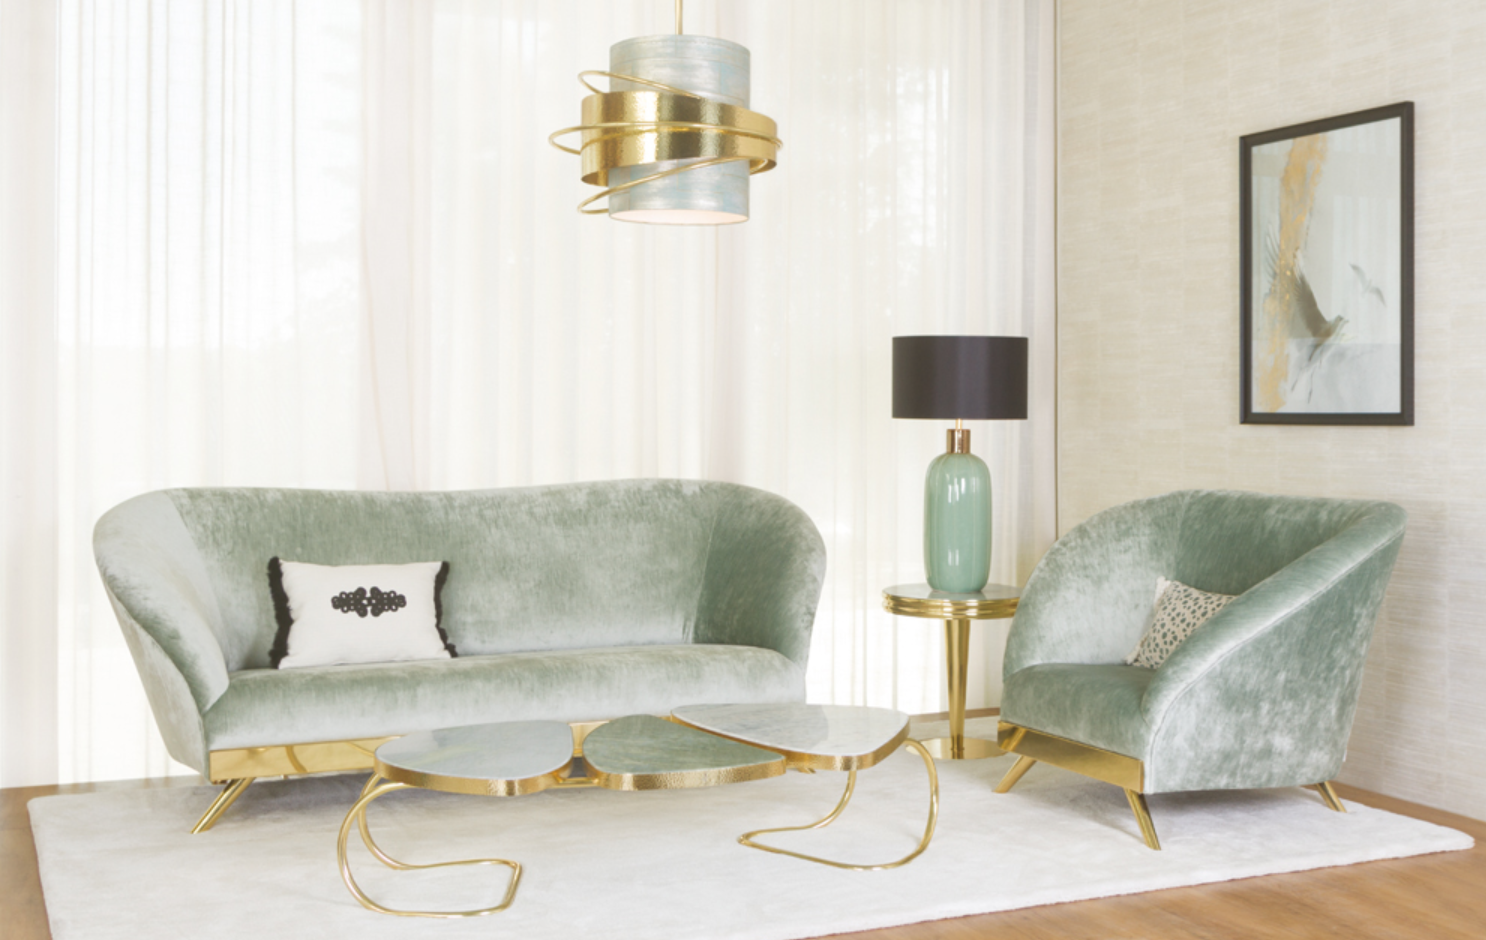 Leaders in elegance and sophistication, Green Apple Home Style is a Portuguese-based company bringing their international style to High Point! What we can expect to see: World-glamour! Gold accents! Modern, luxe designs.